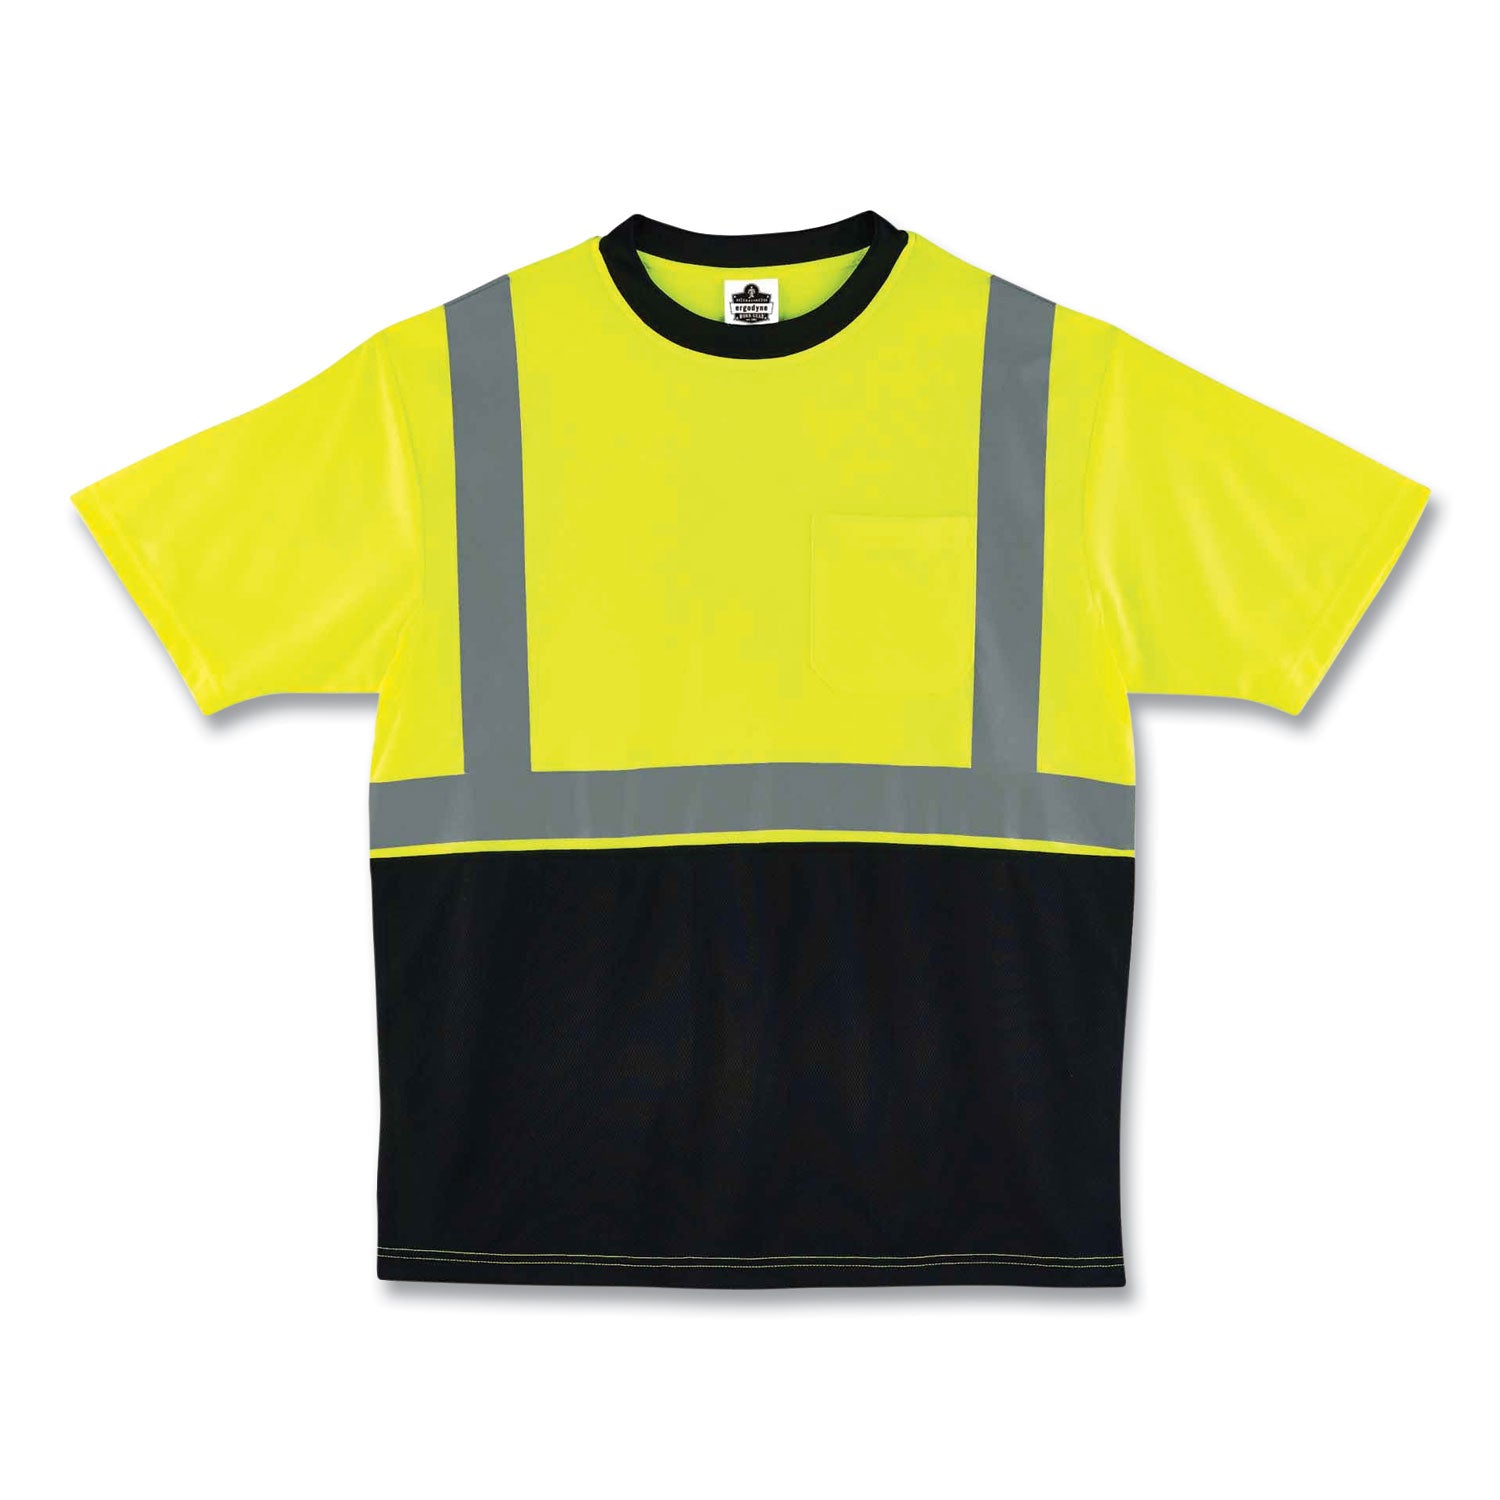 glowear-8289bk-class-2-hi-vis-t-shirt-with-black-bottom-4x-large-lime-ships-in-1-3-business-days_ego22508 - 1